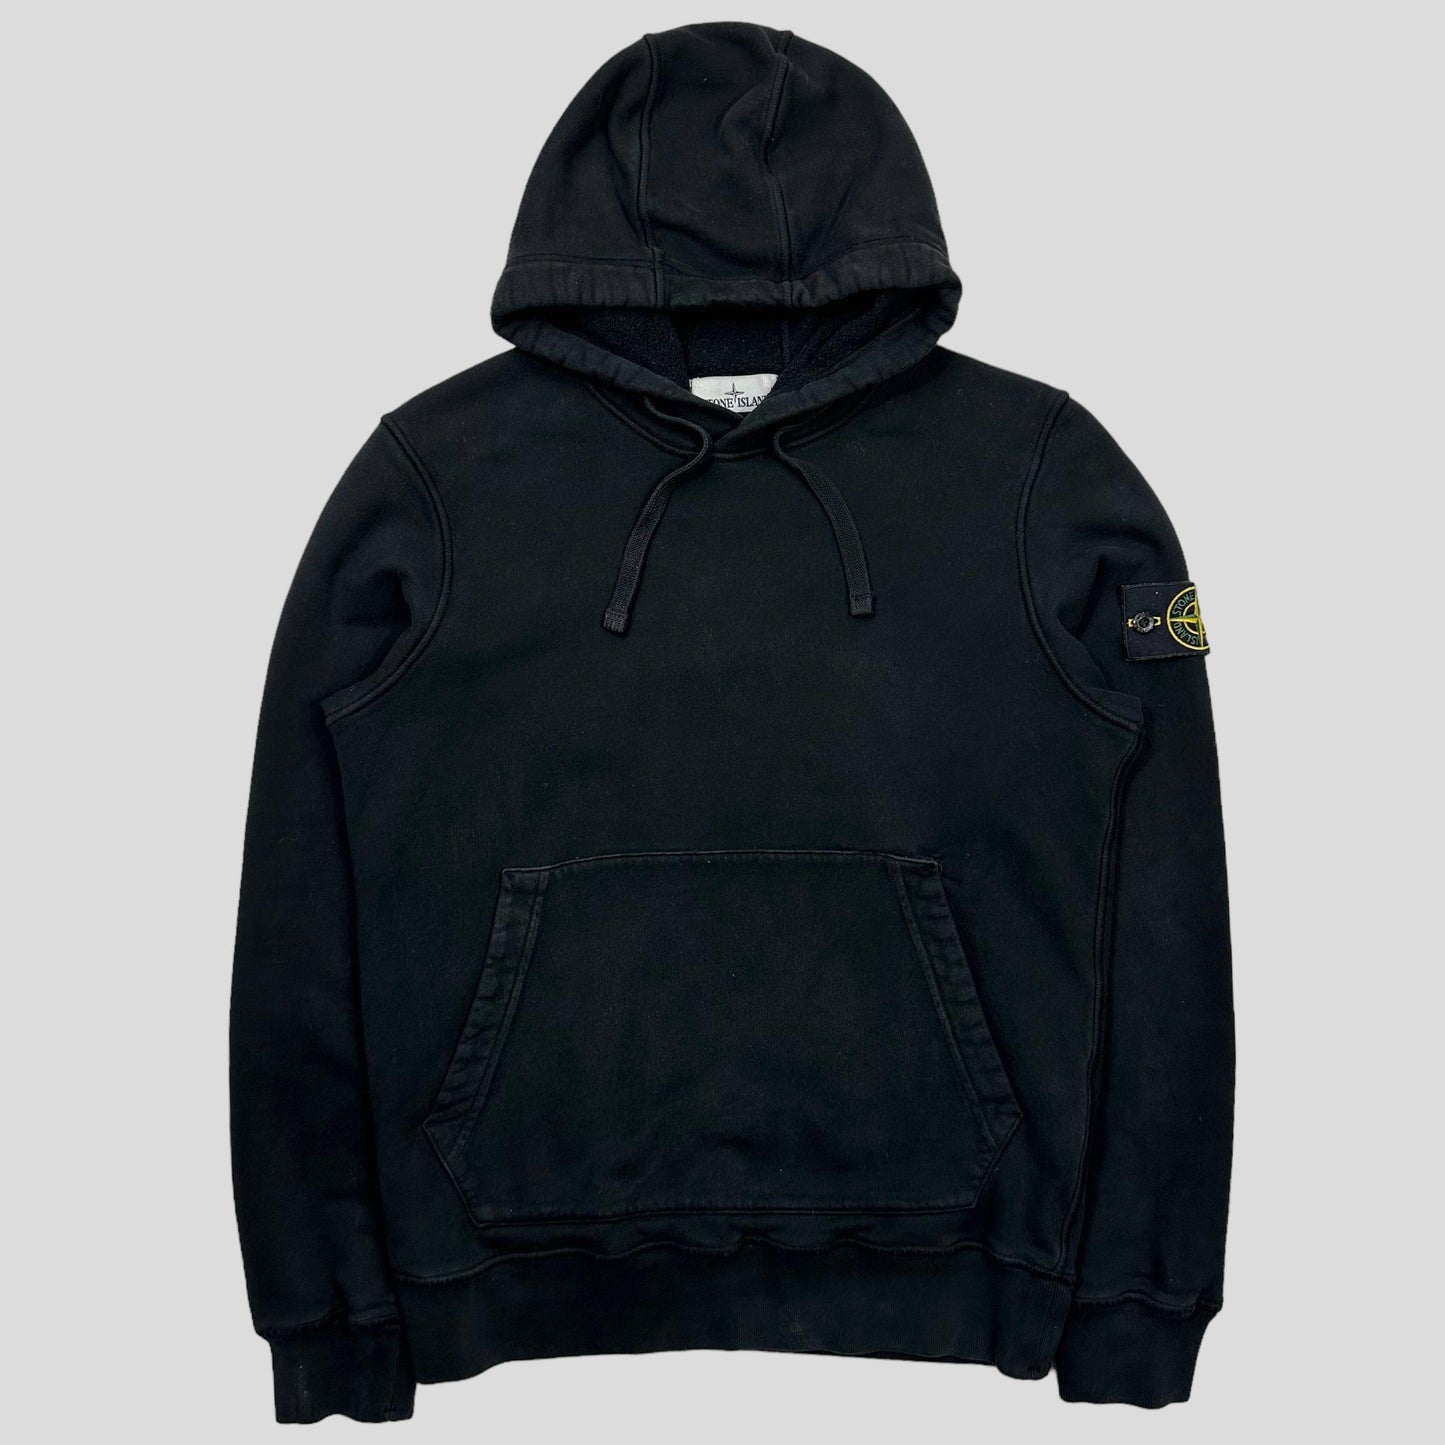 Stone Island AW20 Black Pullover Hoodie - S/M - Known Source